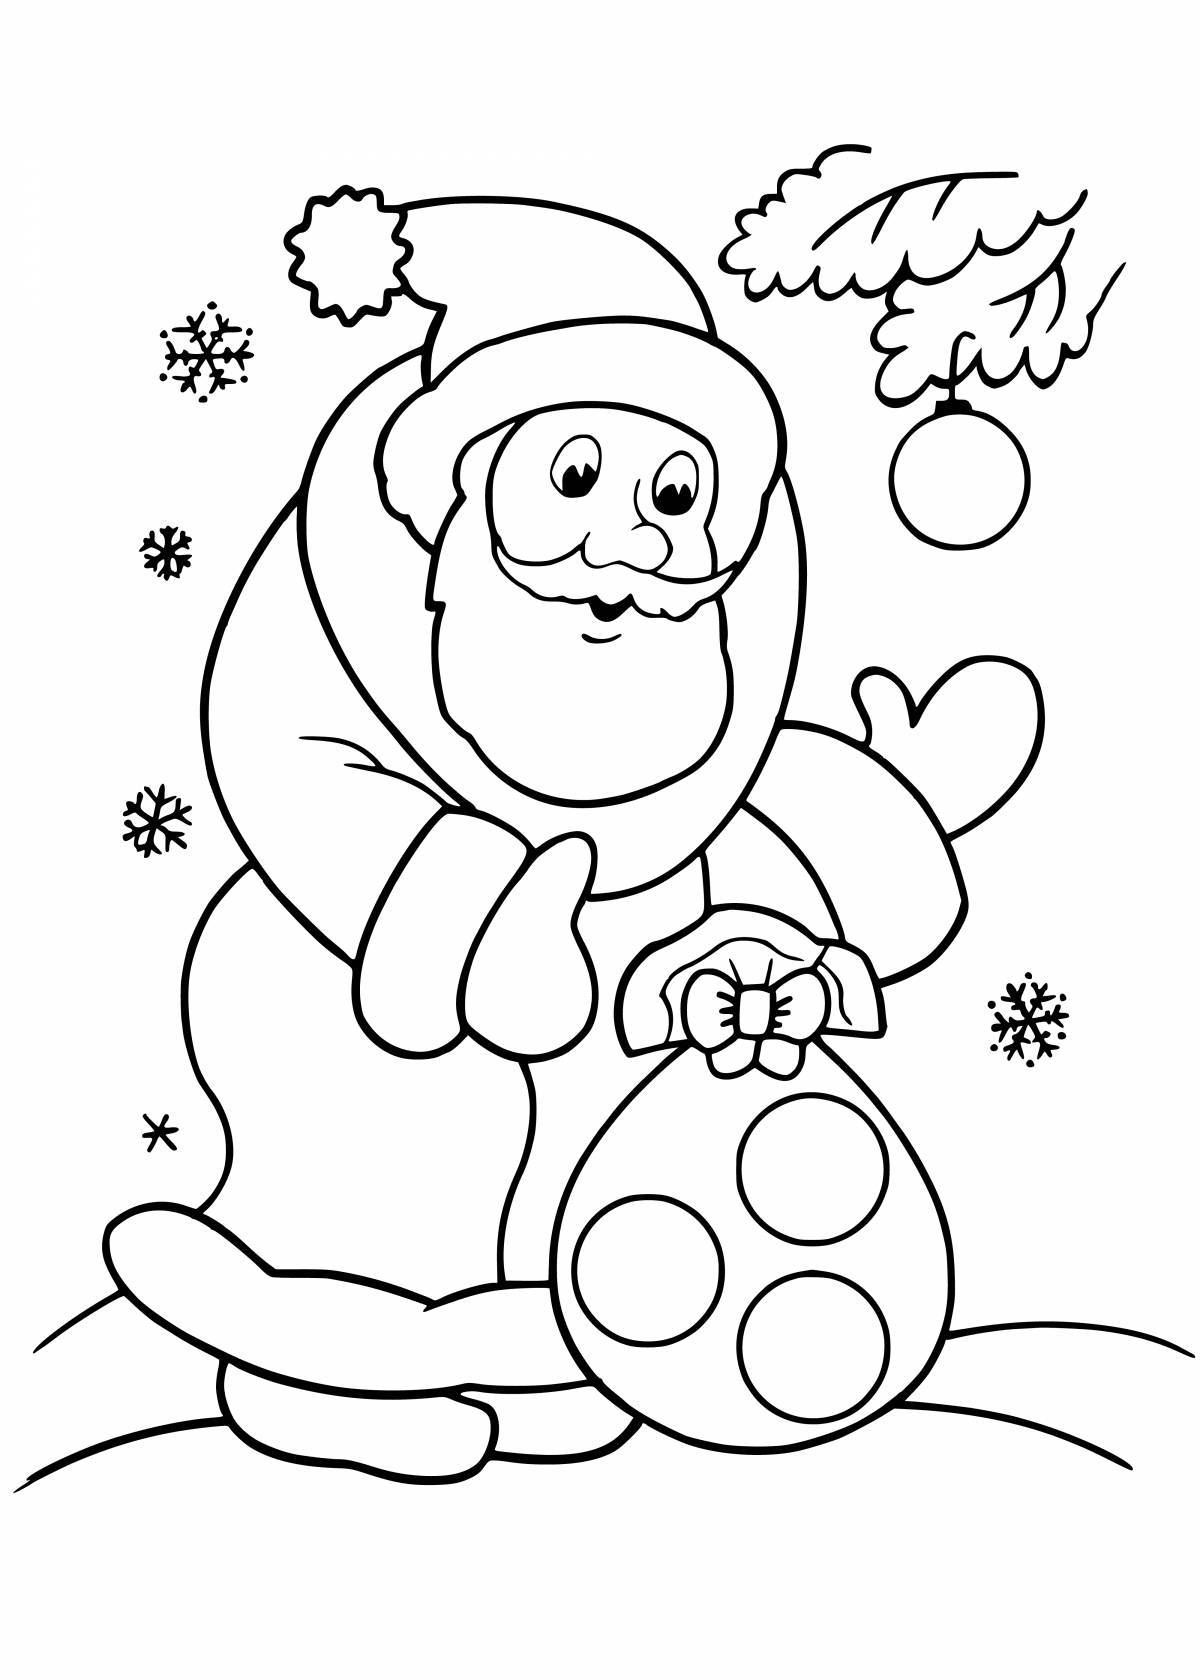 Christmas lively coloring book